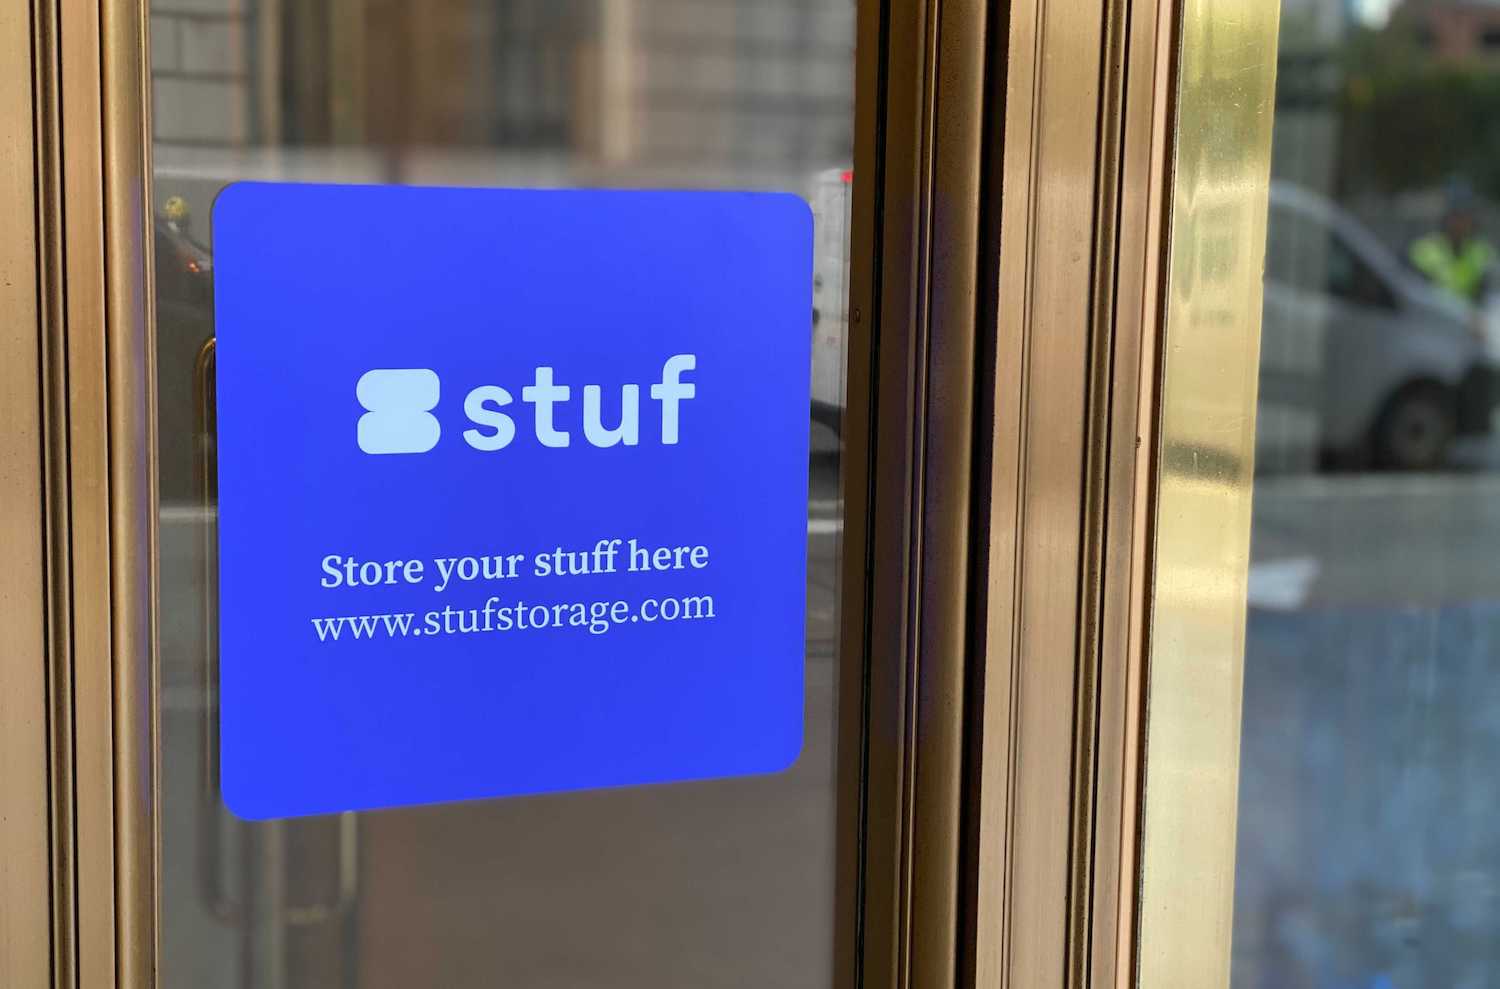 Stuf’s logo on a blue sign affixed to a gray building in San Francisco’s Financial District.